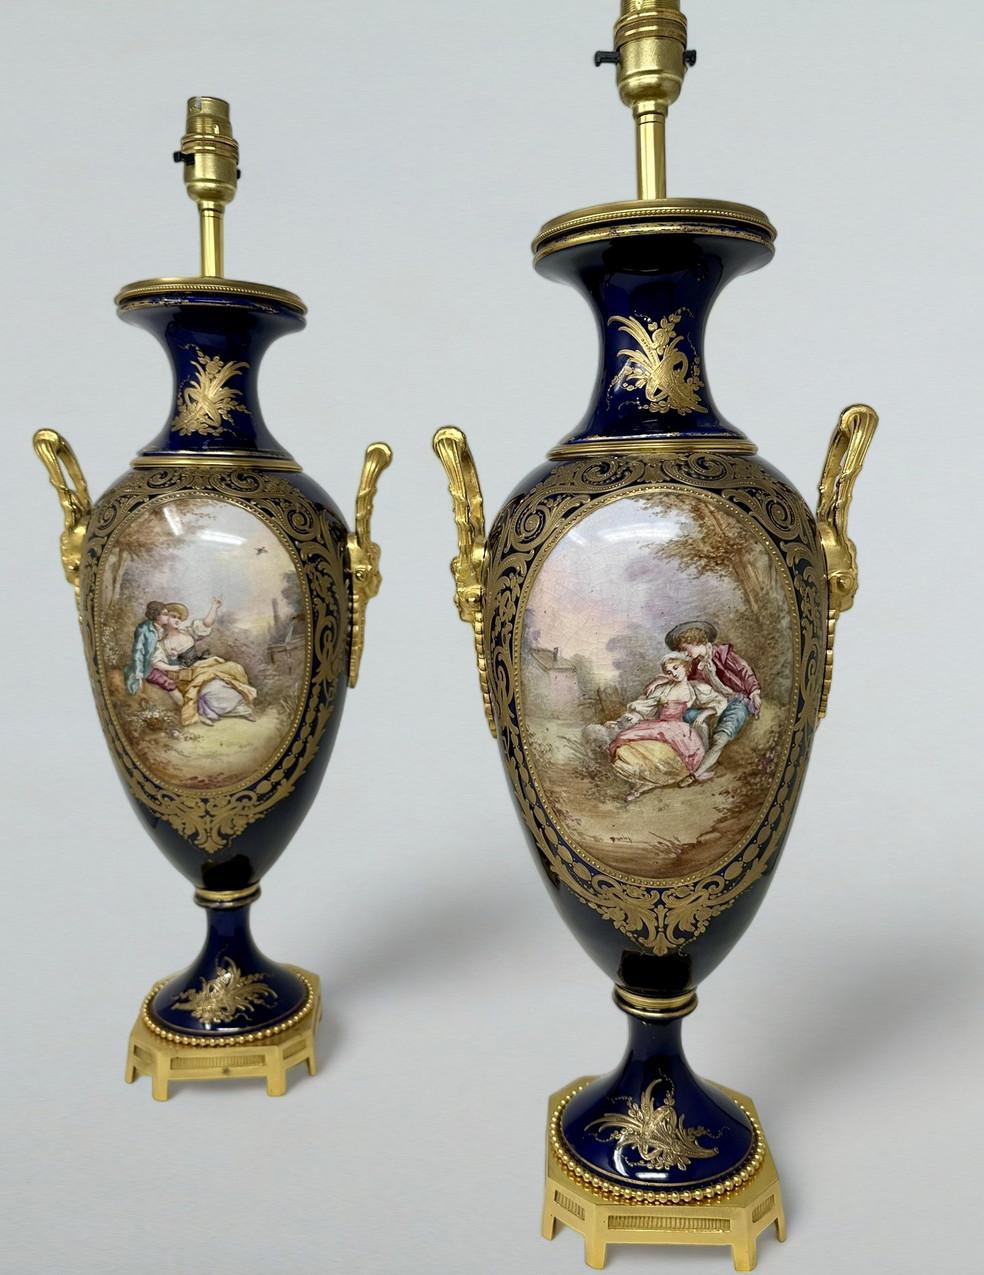 Stunning imposing Pair of French Sevres Soft Paste Porcelain and Ormolu Twin Handle Electric Table Lamps of traditional bulbous form, and of good size proportions, raised on a very ornate dome shaped circular porcelain base on a plain square support